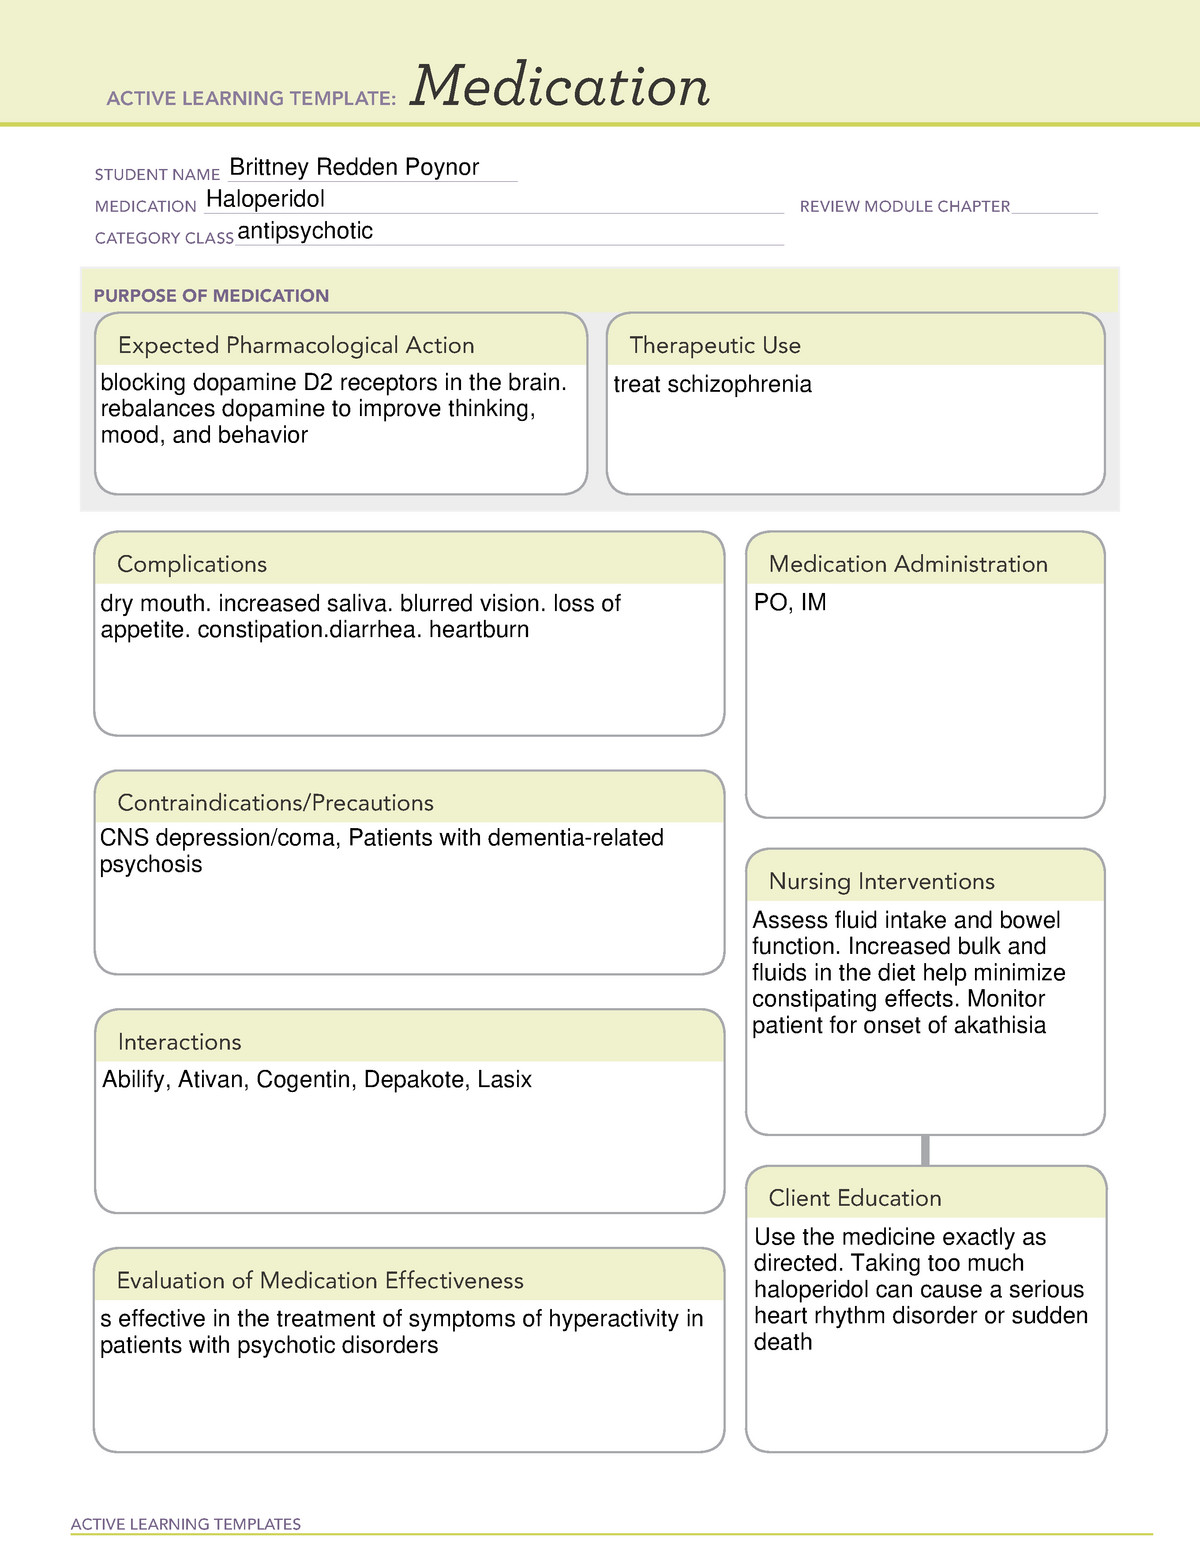 Haloperidol ATI medication template psych ACTIVE LEARNING TEMPLATES